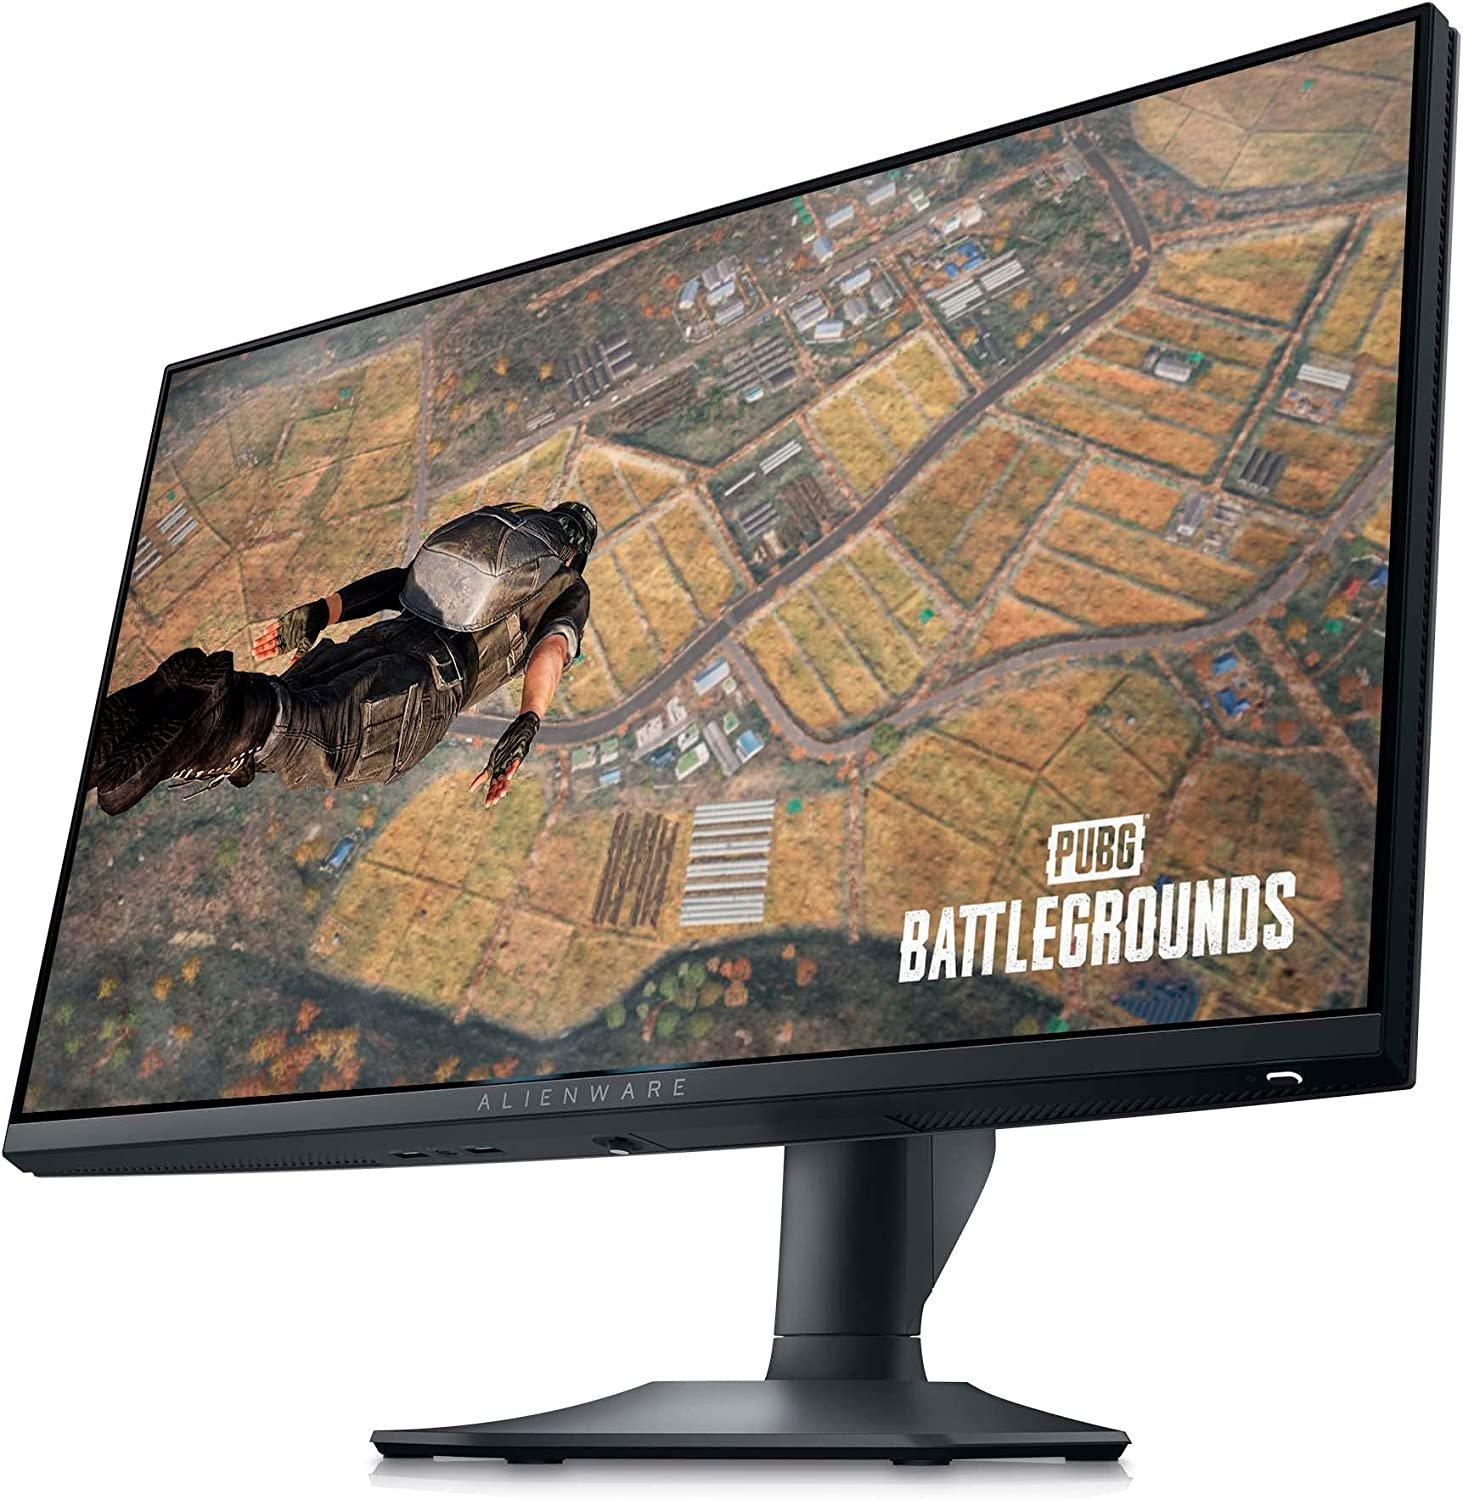 This 360Hz Dell Alienware monitor is just over $300 thanks to an  20%  off code